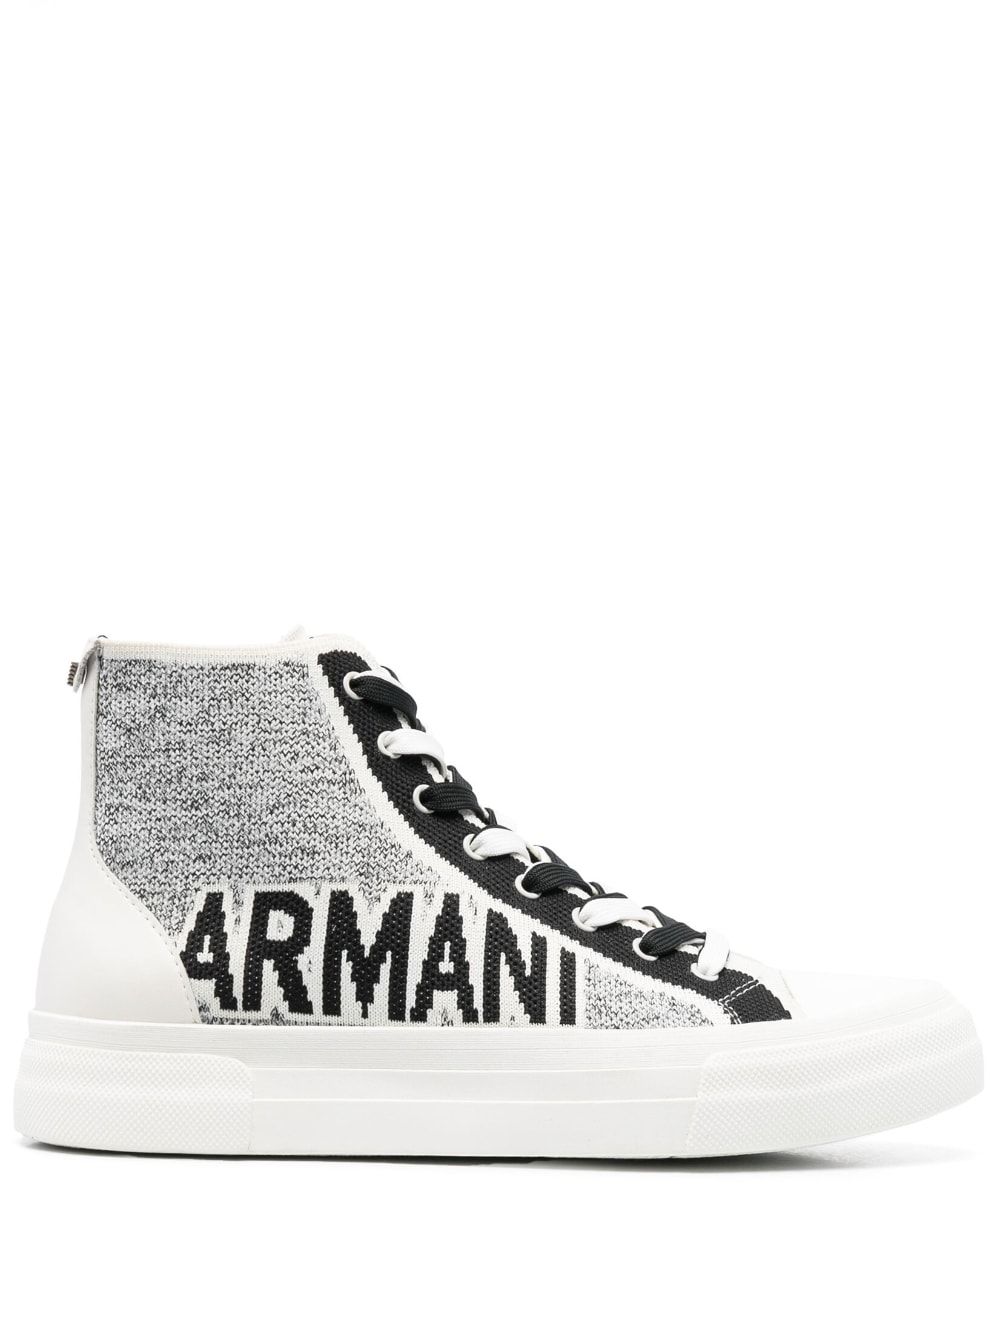 Emporio Armani - intarsia-knit high-top sneakers - men - Polyamide/Recycled PolyesterRubber/Recycled Polyester - 10 - White